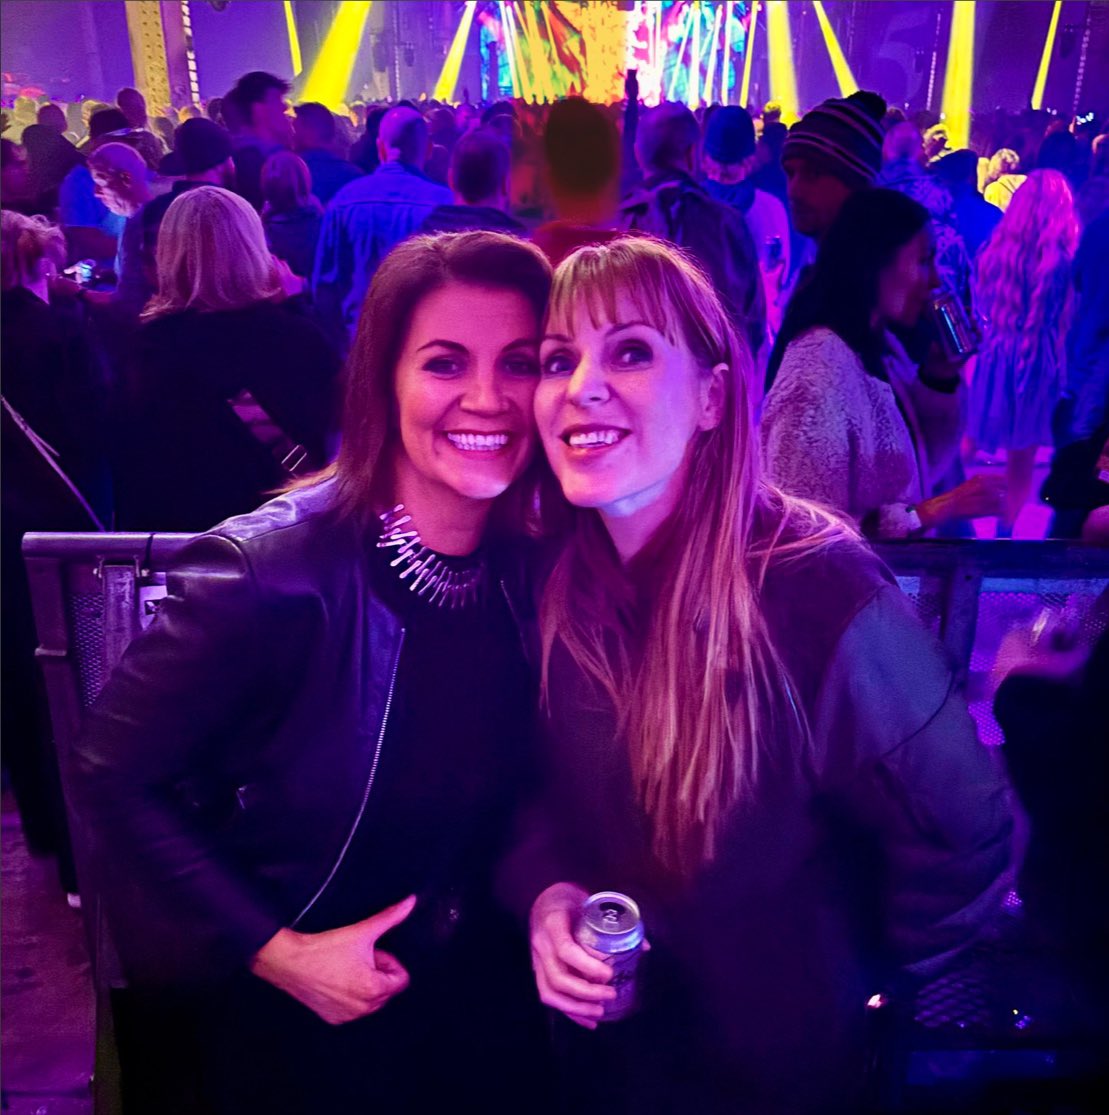 Here is Angela Rayner out drinking with Julia Hartley-Brewer who said today that she has not shed one tear over the deaths of Palestinian children